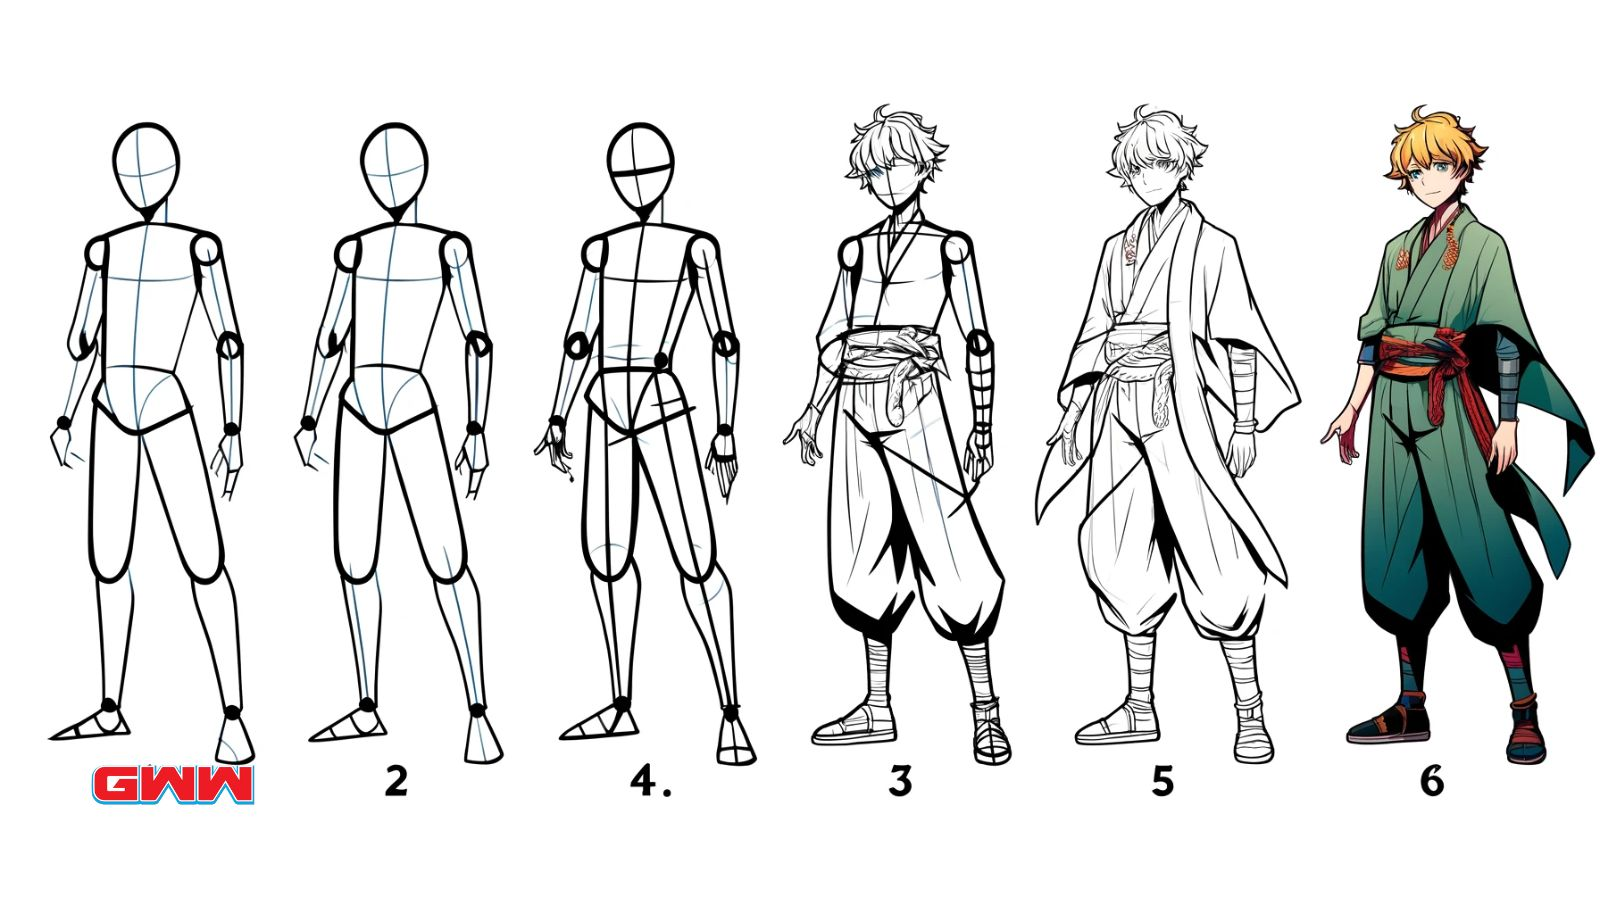 A sketch of an anime body poses from start to finish